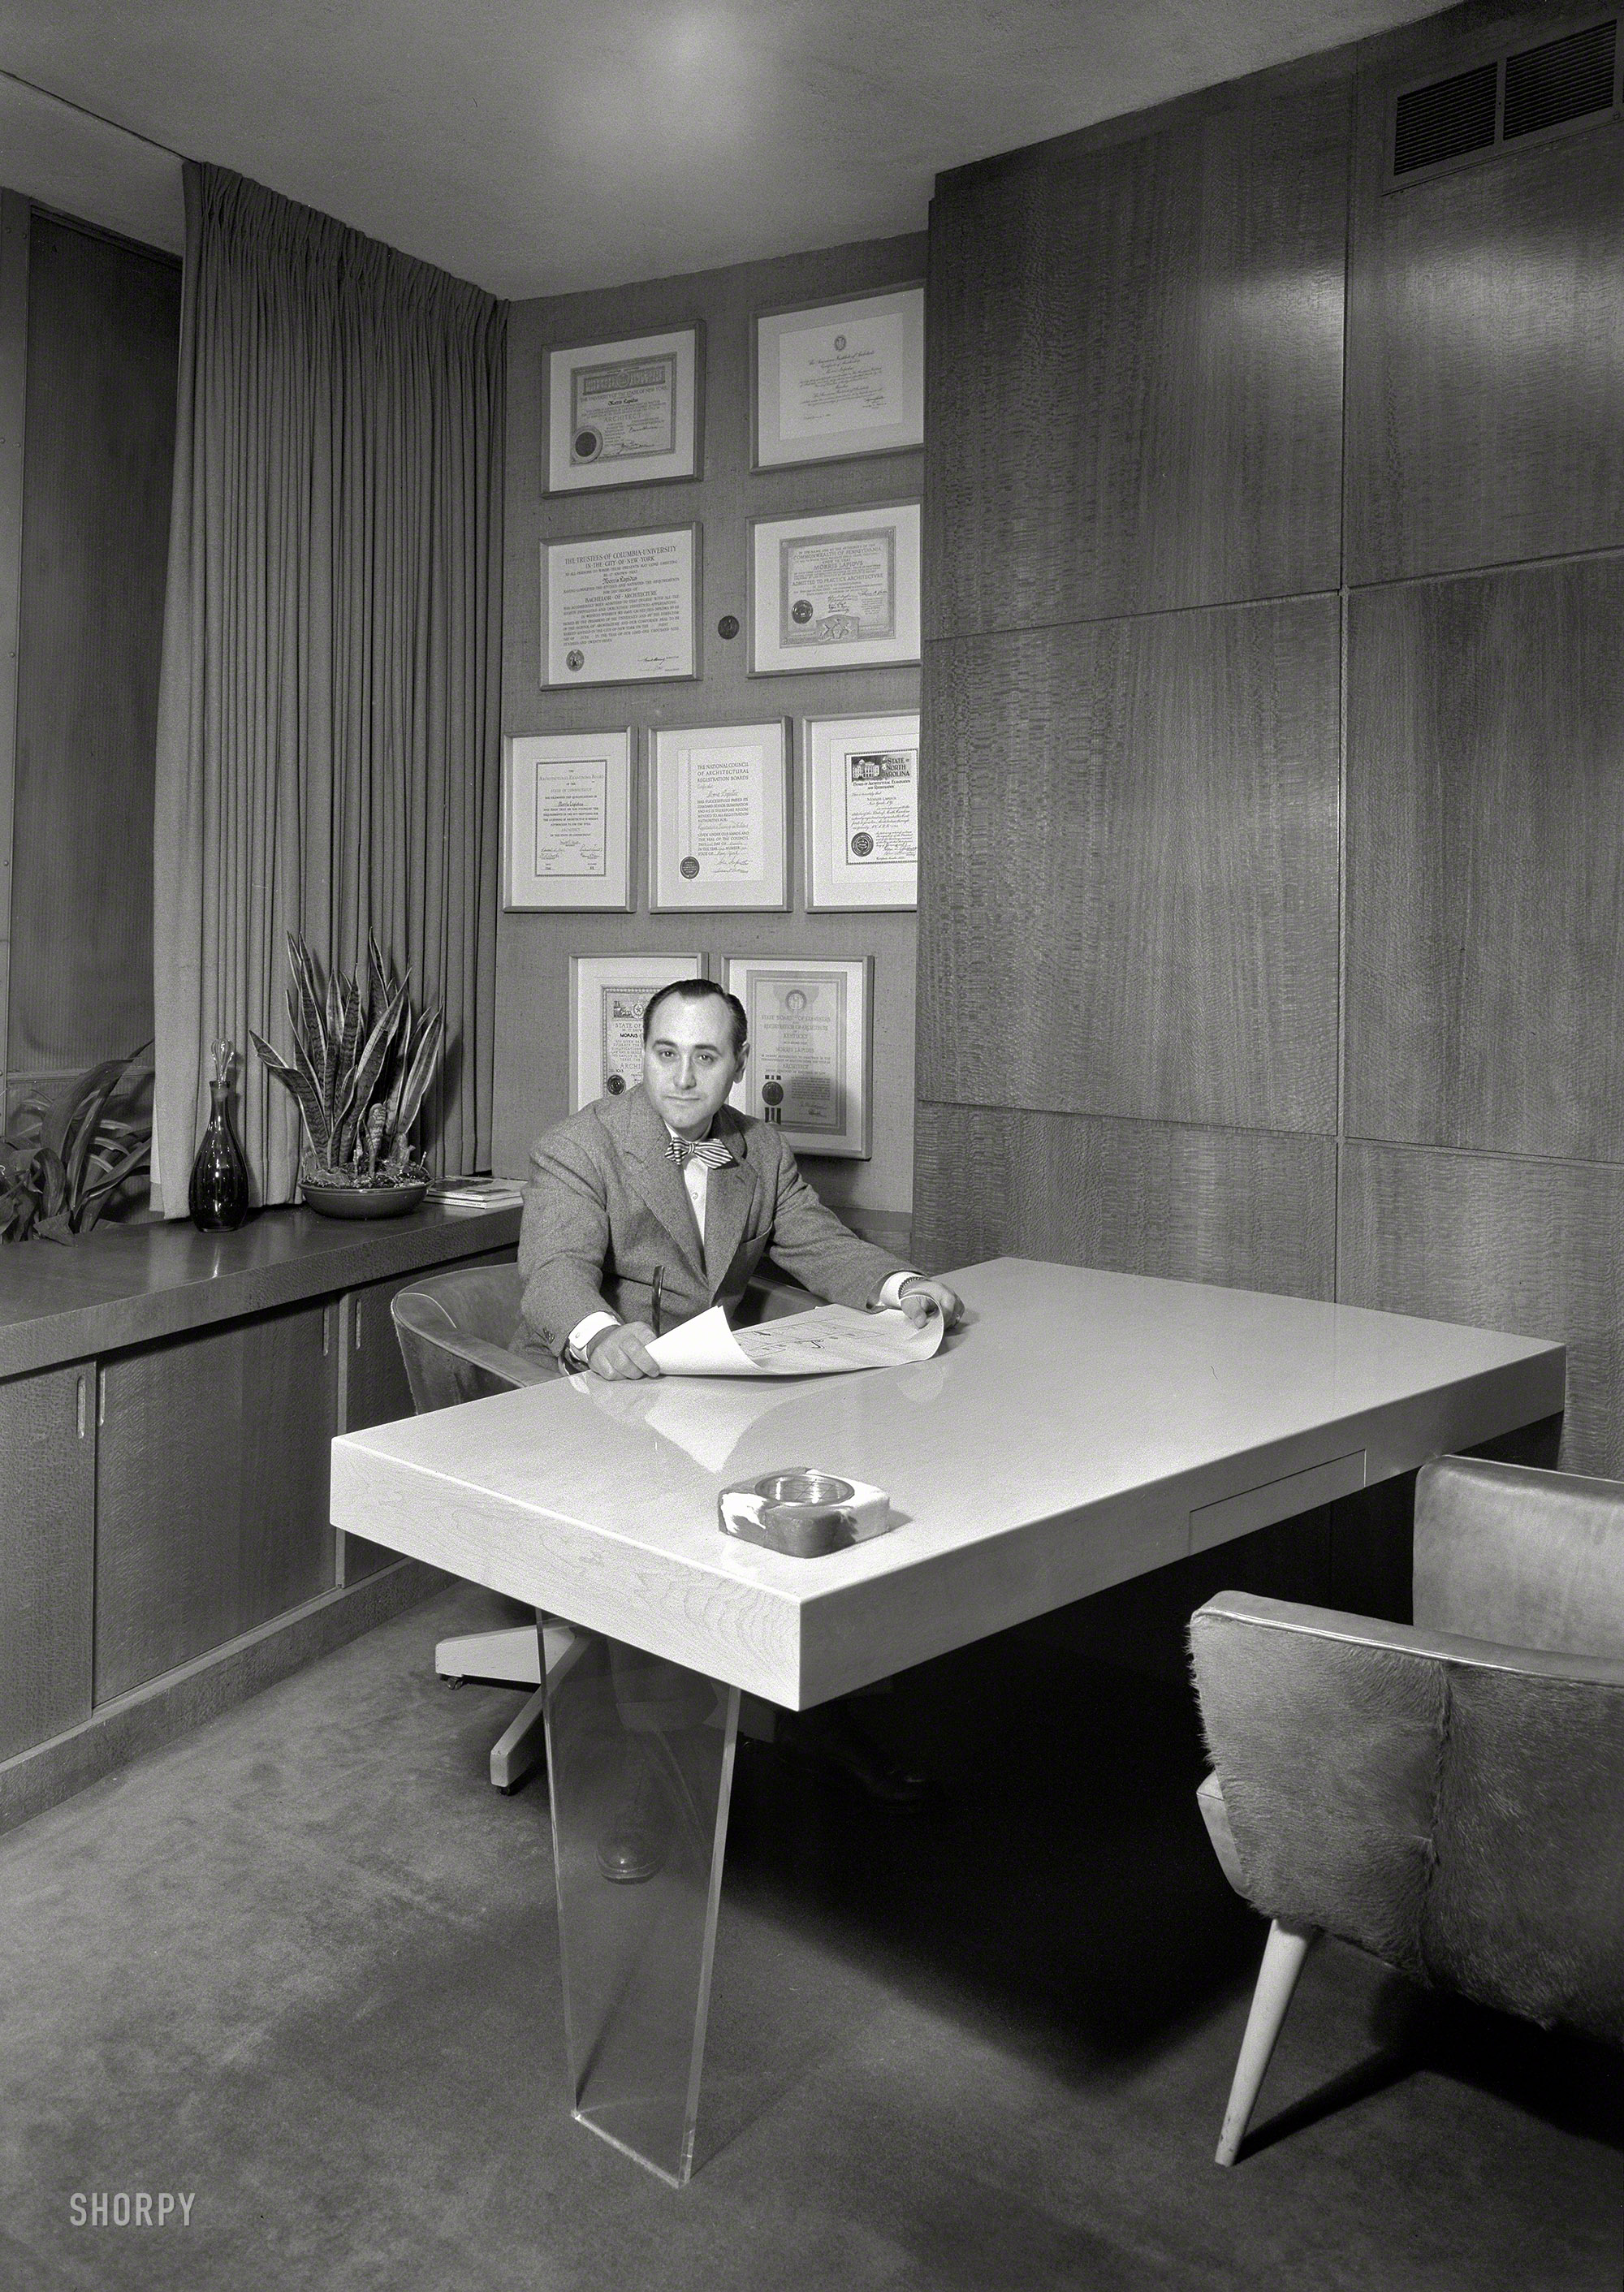 &nbsp; &nbsp; &nbsp; &nbsp; The architectural ubermensch of Miami Beach, best remembered for the Fontainebleau Hotel.
Dec. 13, 1946. "Morris Lapidus, 256 E. 49th Street, New York. Lapidus in his office." Large-format acetate negative by Gottscho-Schleisner. View full size.